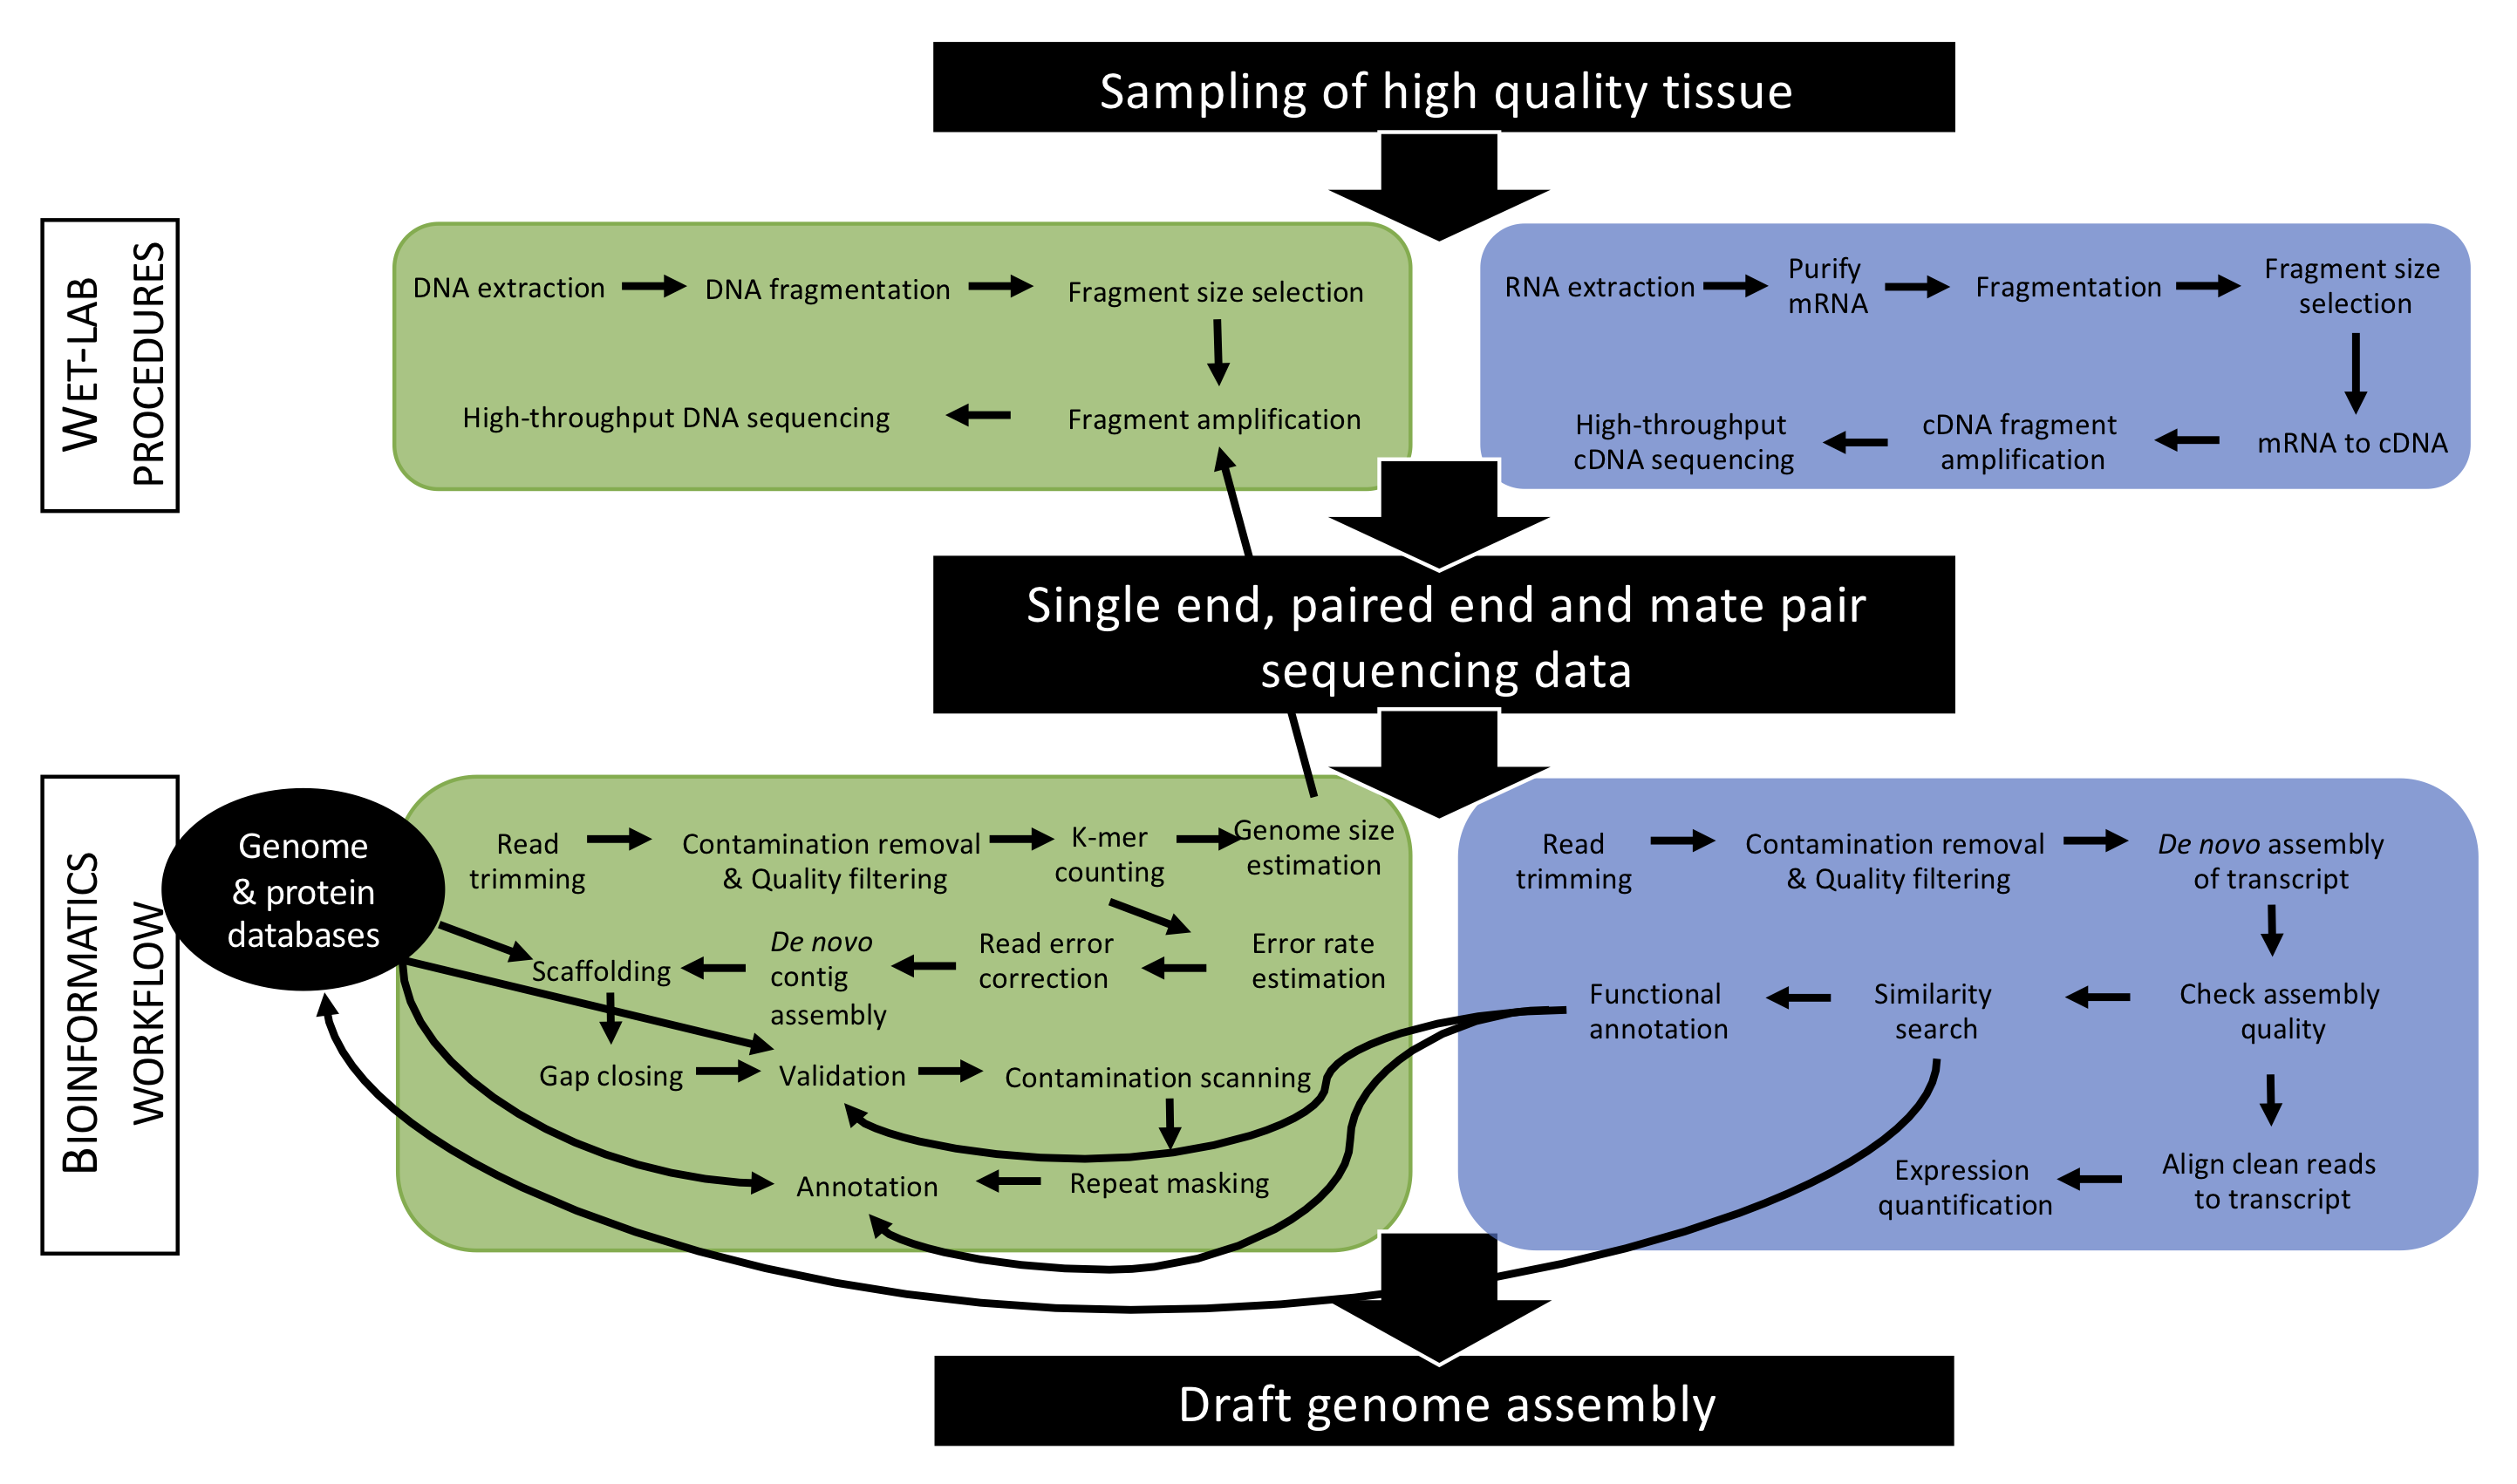 Overview of an example of an approach applied to produce a draft genome assembly. In this course, students will become accustomed with such approach and master some specific key steps.